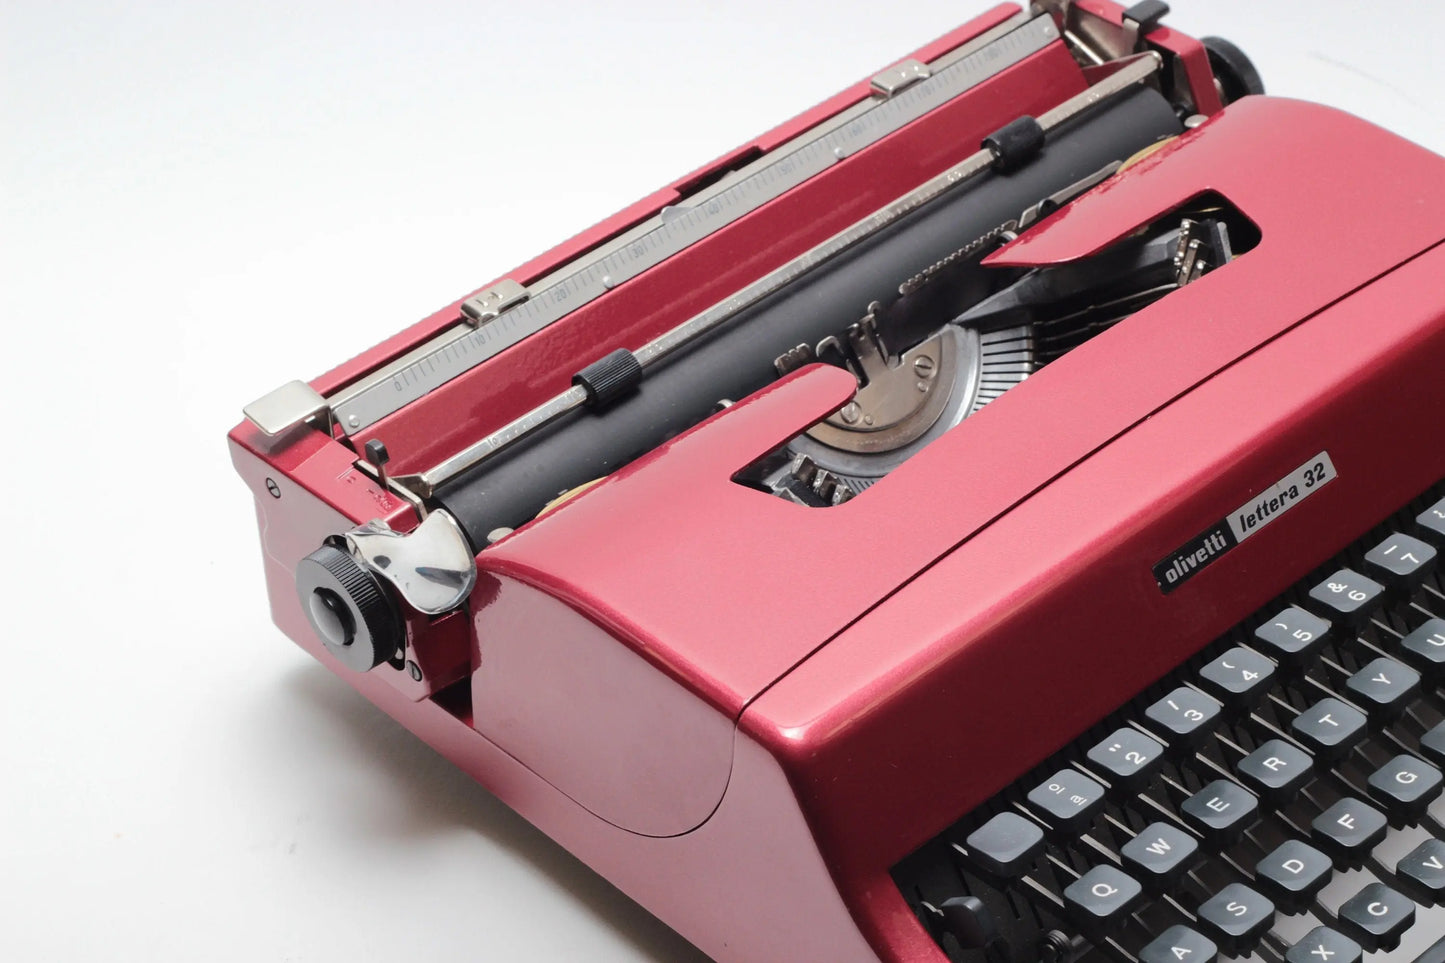 Limited Edition Olivetti Lettera 32 Coral Red Typewriter, Vintage, Manual Portable, Professionally Serviced by Typewriter.Company - ElGranero Typewriter.Company